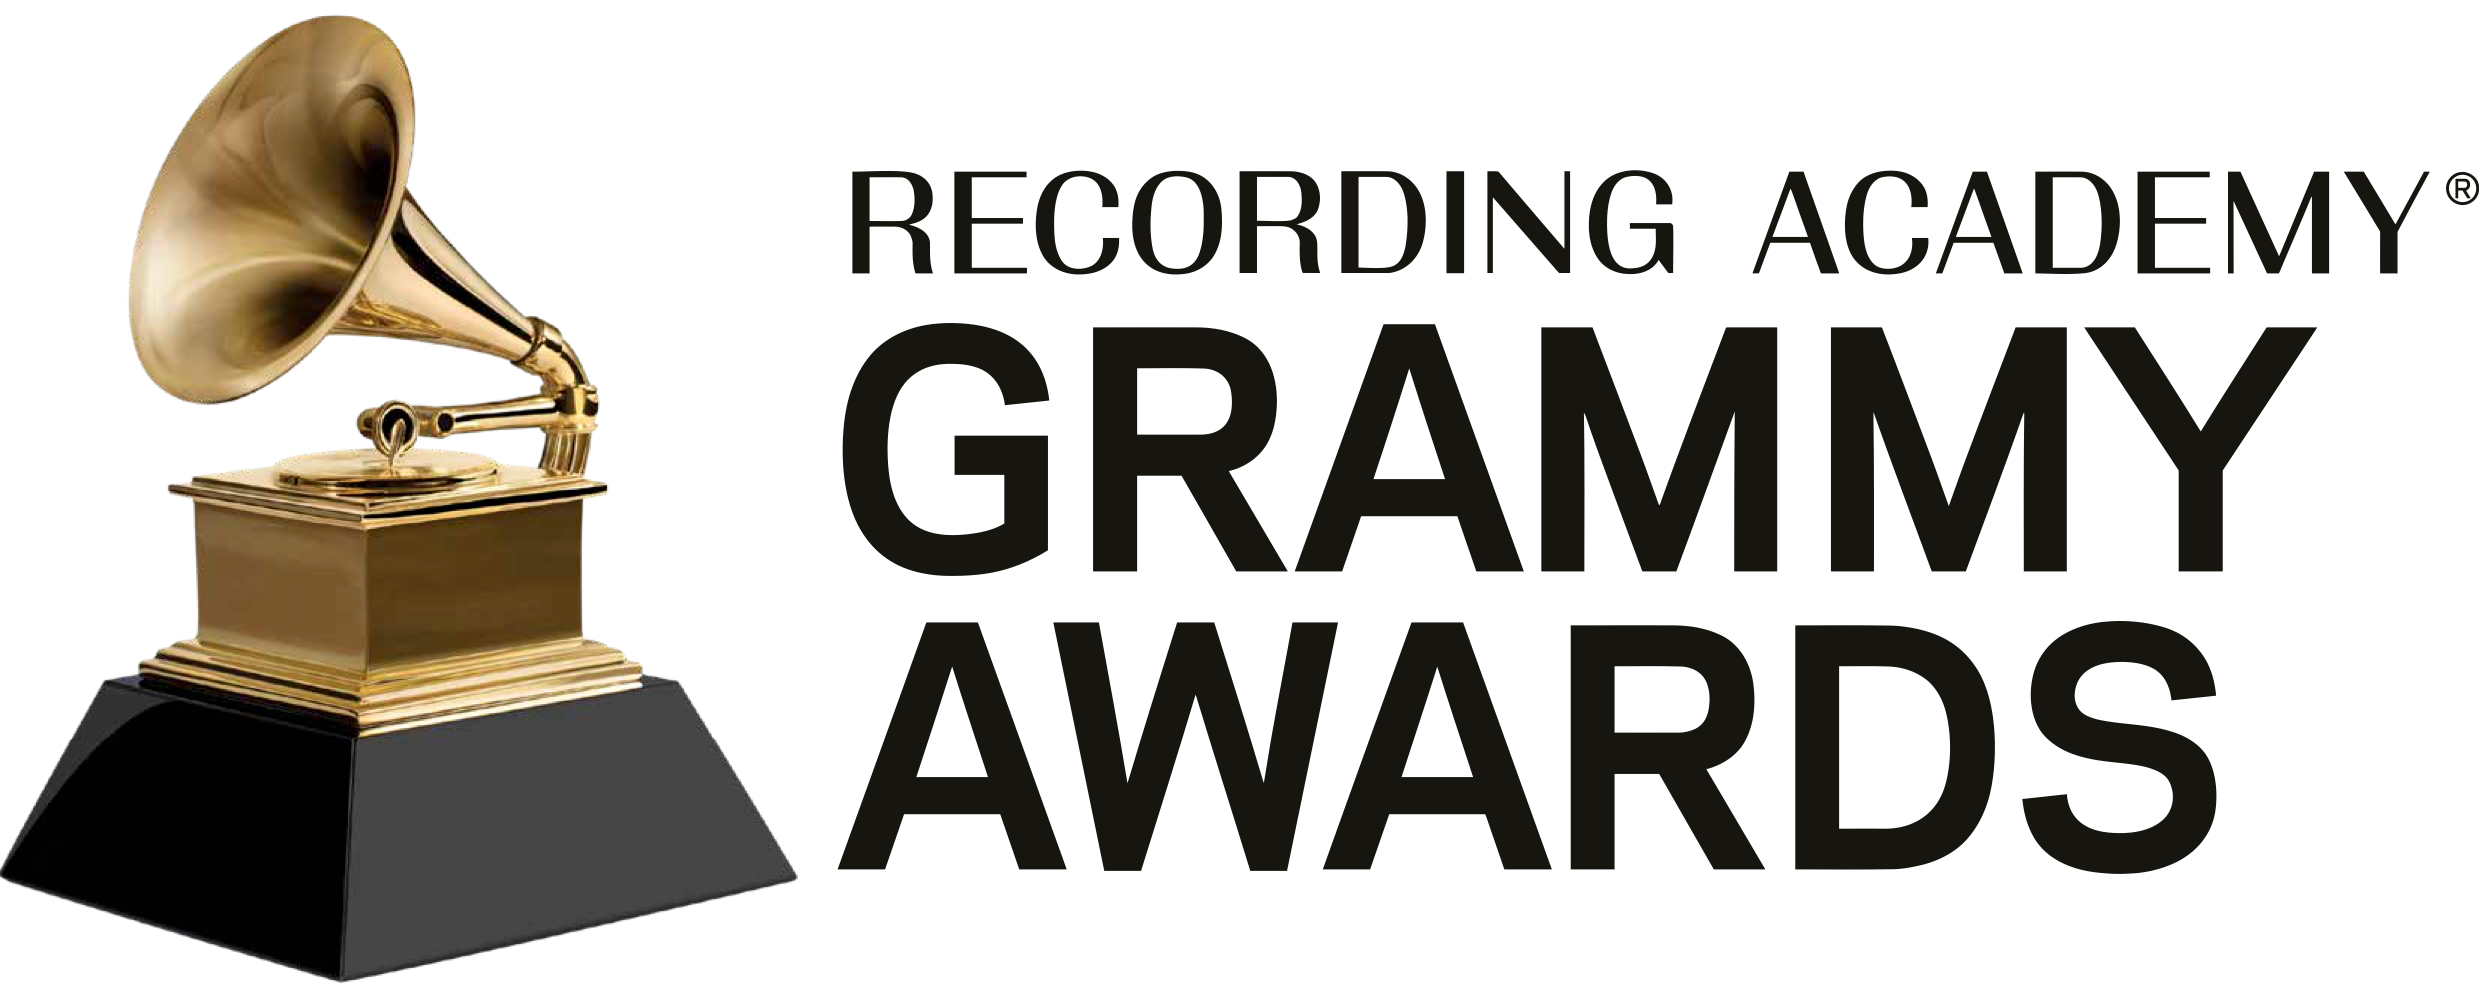 Grammy Awards transparent icon.png